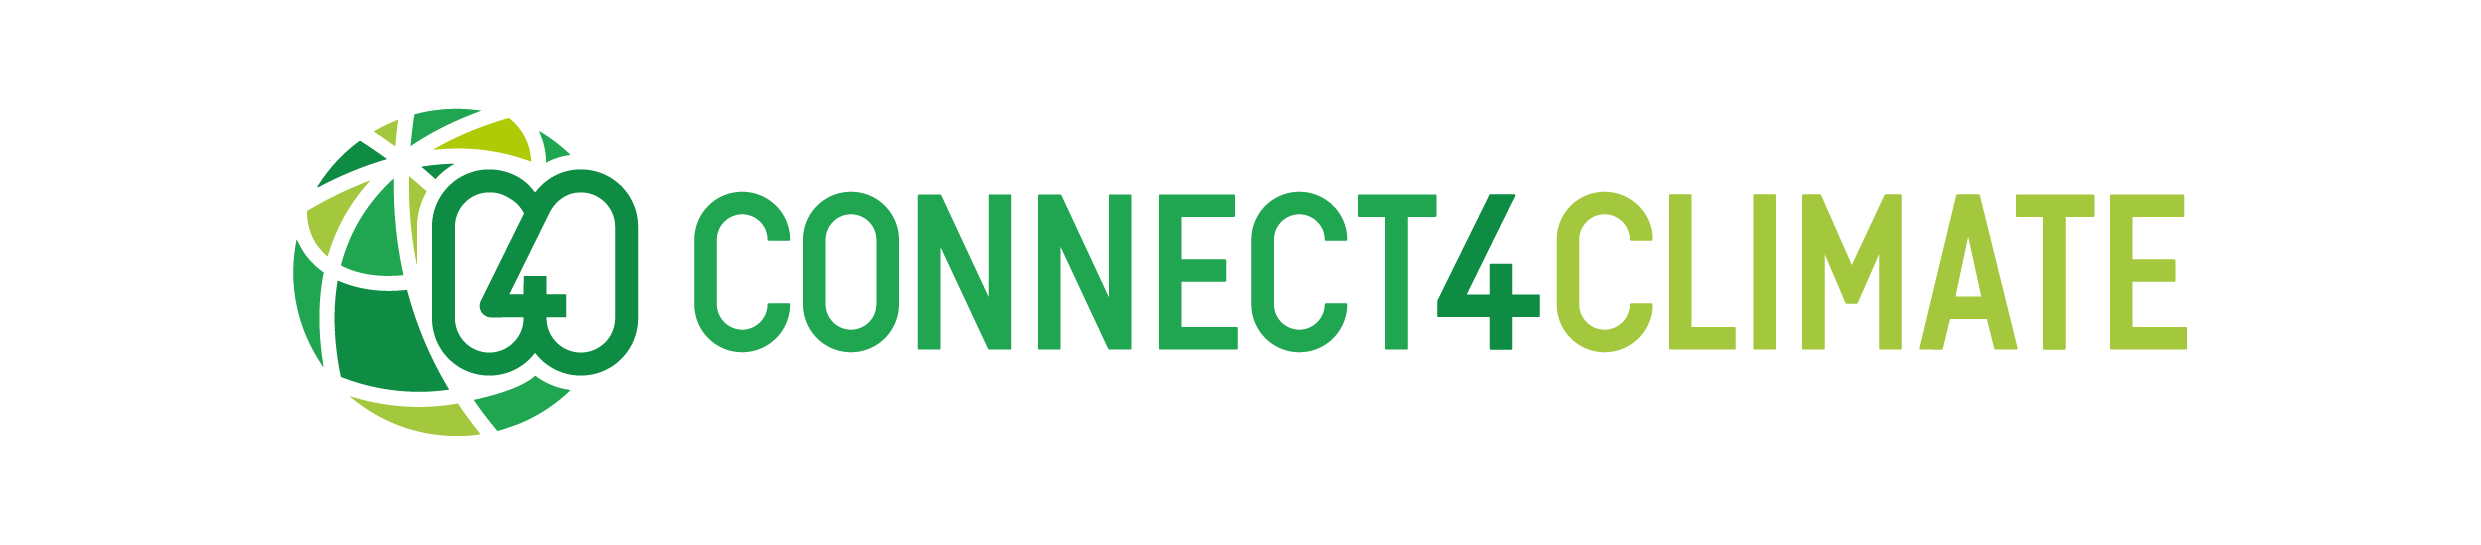 CONNECT4CLIMATE - LOGO_LOGOTYPE.png